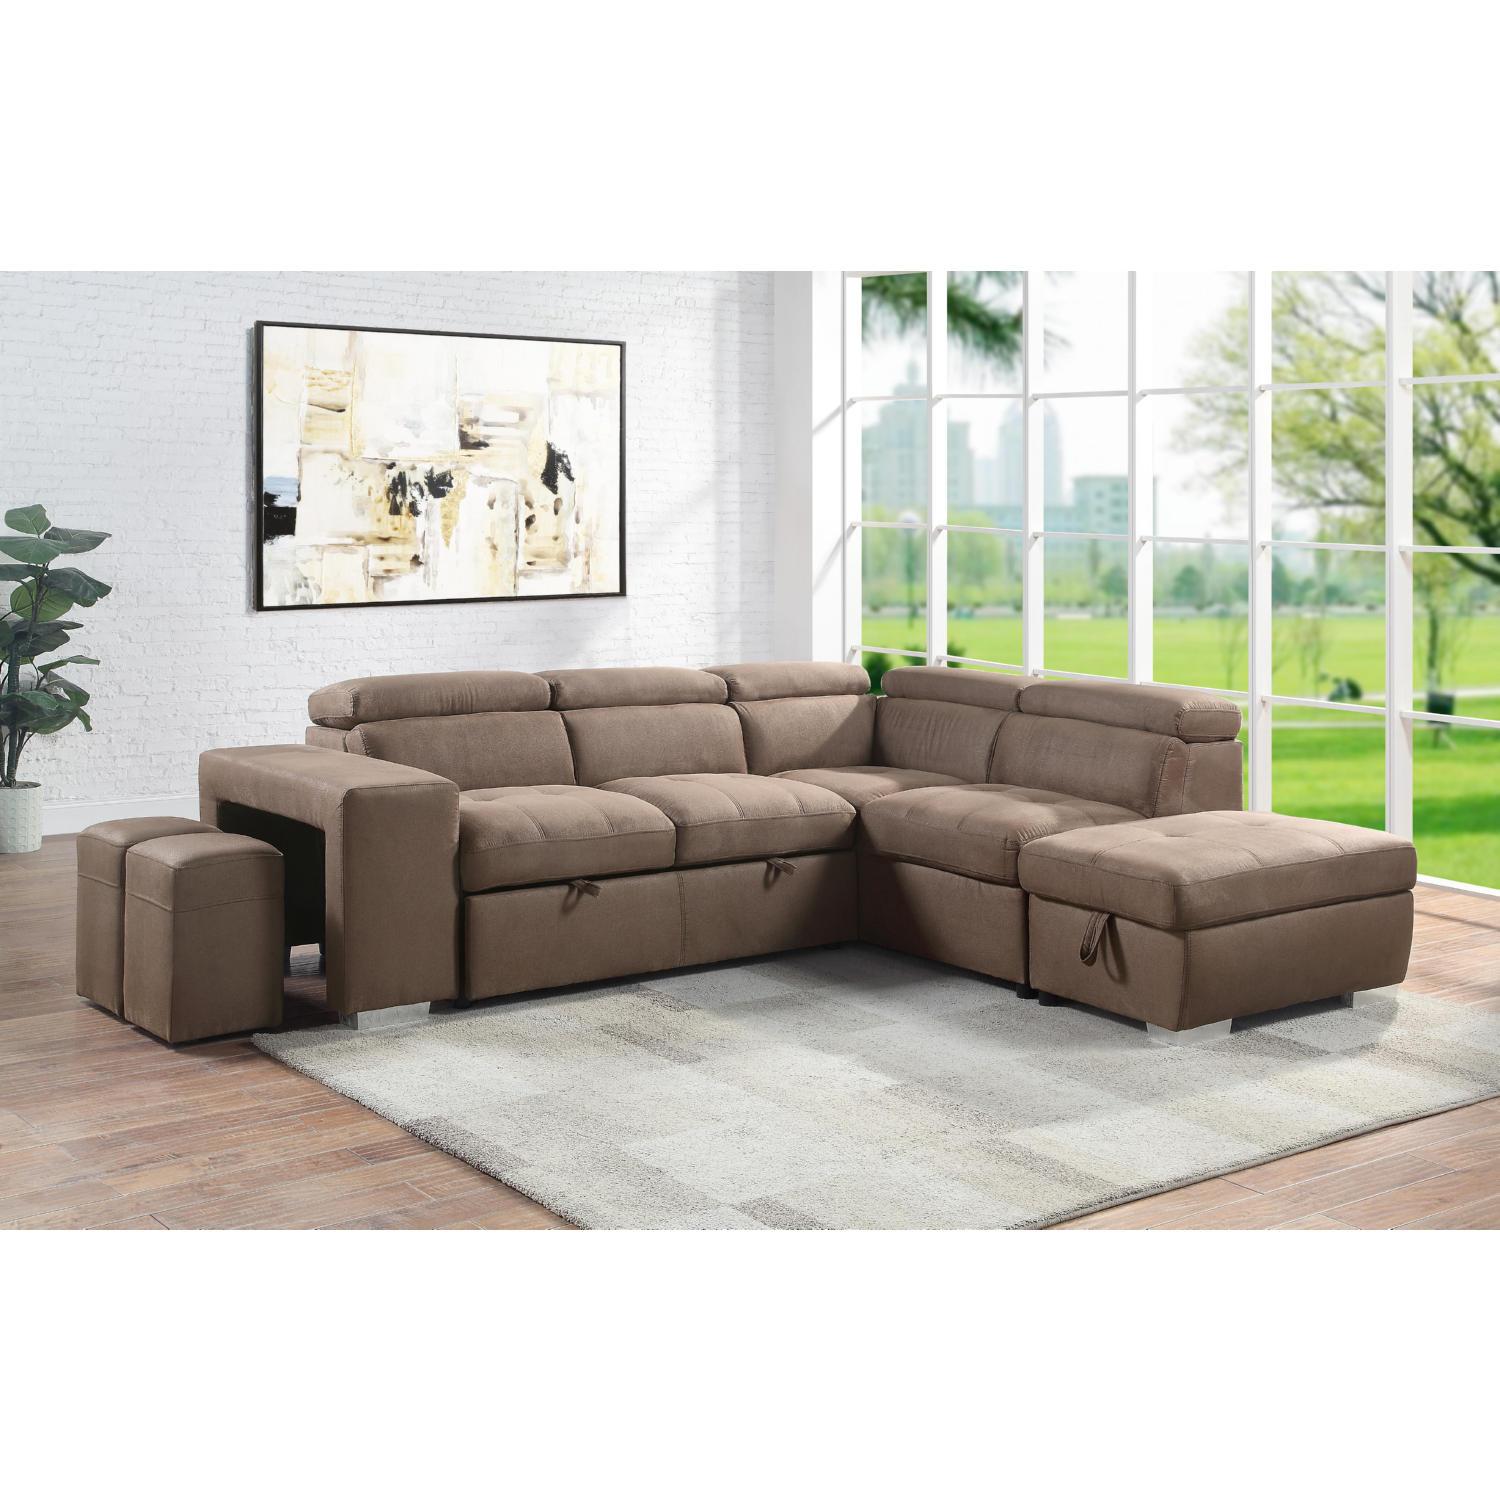 Modern, Transitional Sectional Set Acoose LV01025-6pcs in Brown Fabric